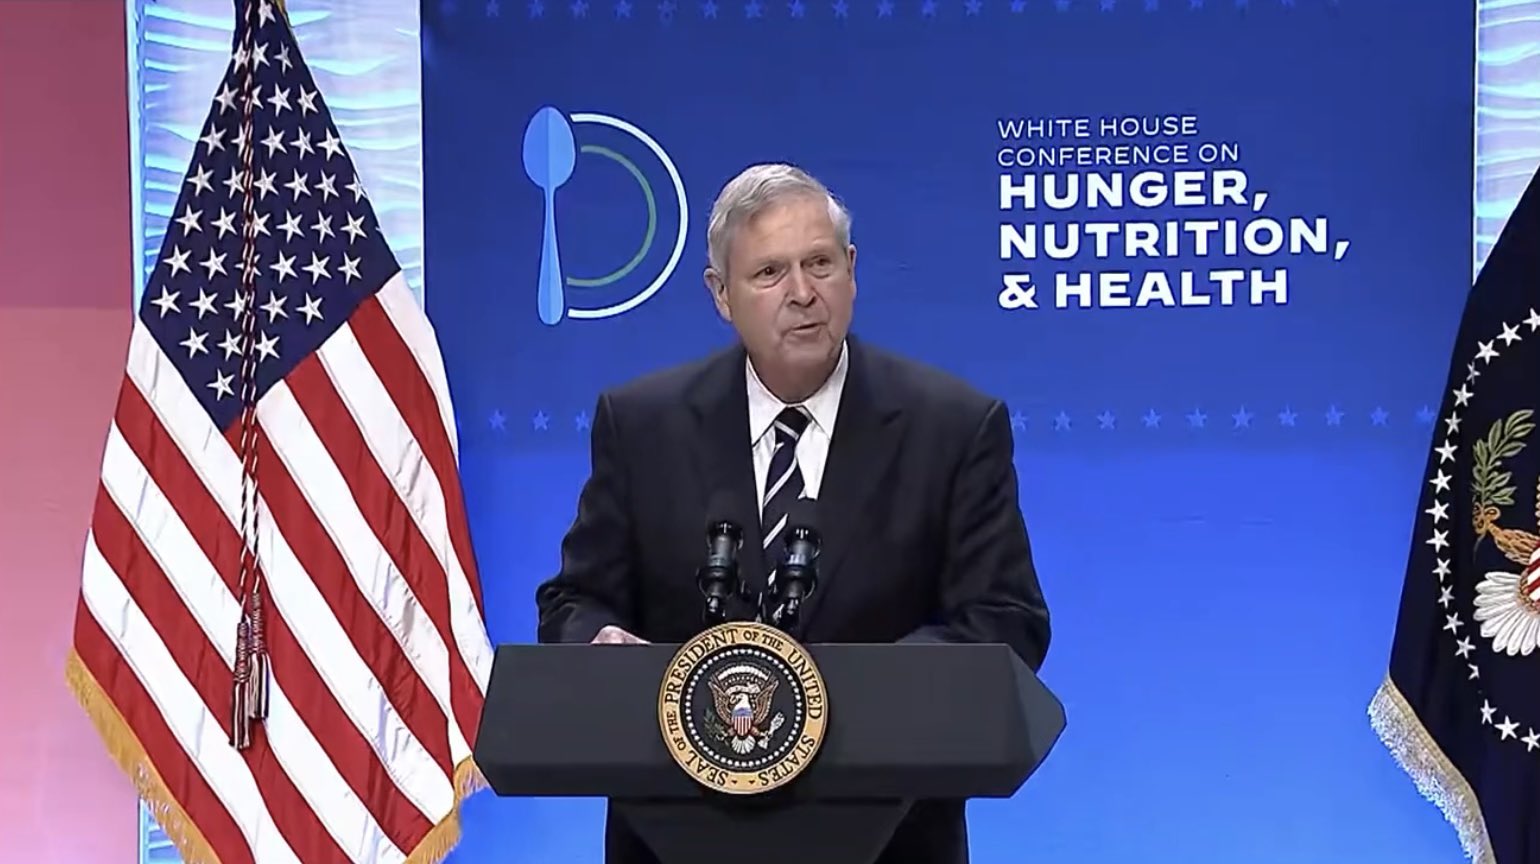 Agriculture Secretary Tom Vilsack speaking behind a podium at the White Conference on Hunger, Nutrition and Health at the Ronald Reagan Building in Washington, DC on September 28, 2022